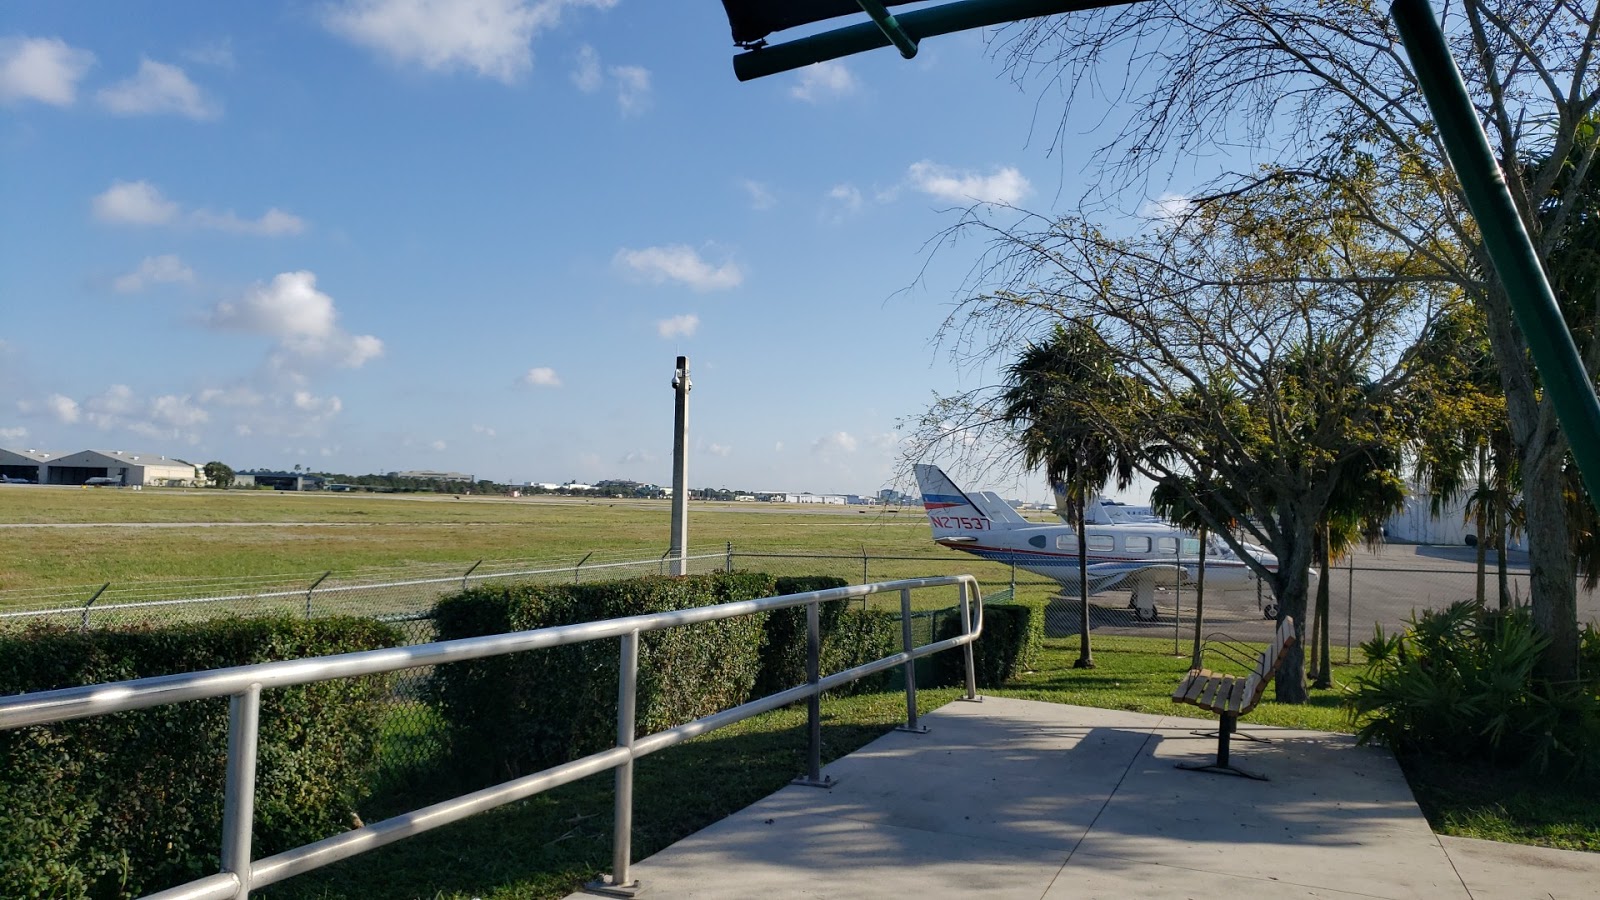 Executive airport viewing area